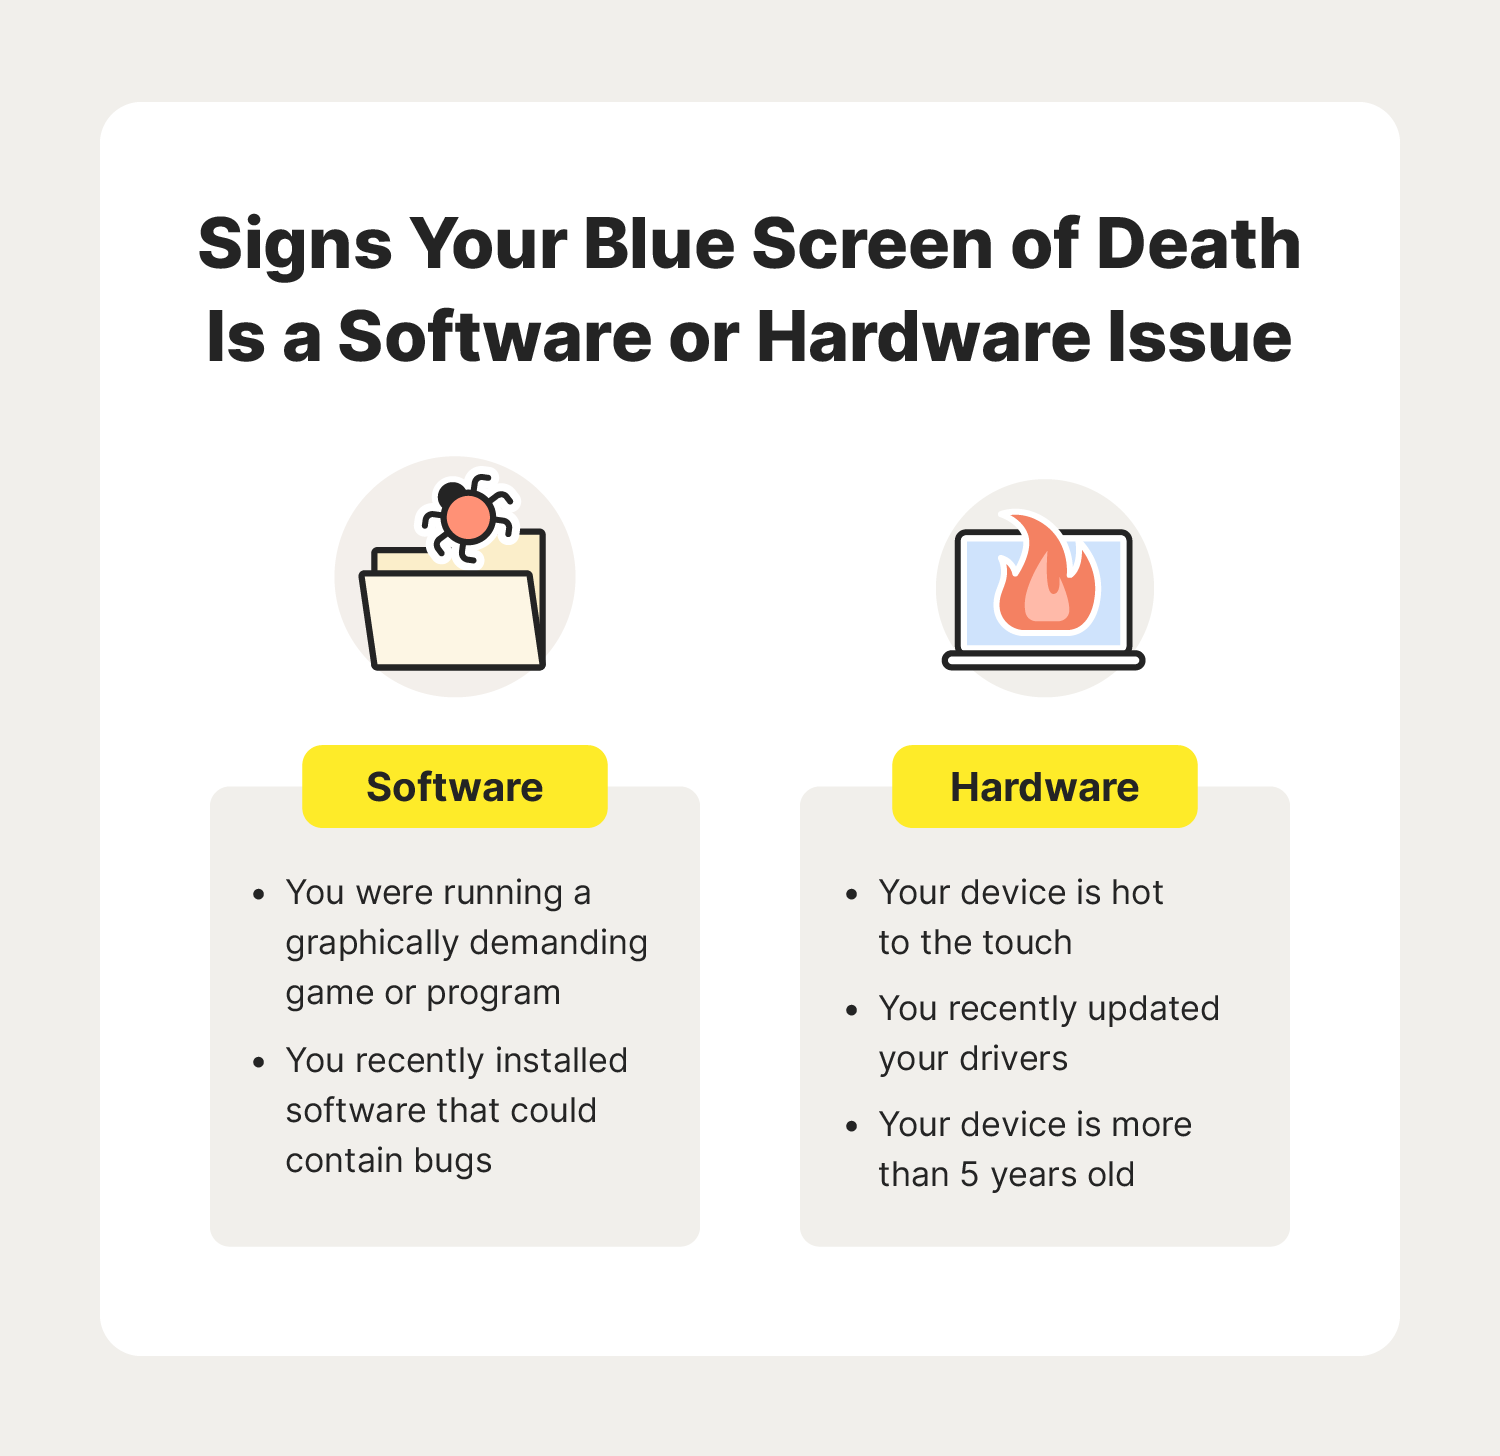 A graphic lists signs indicating whether a blue screen of death is a hardware or software issue.